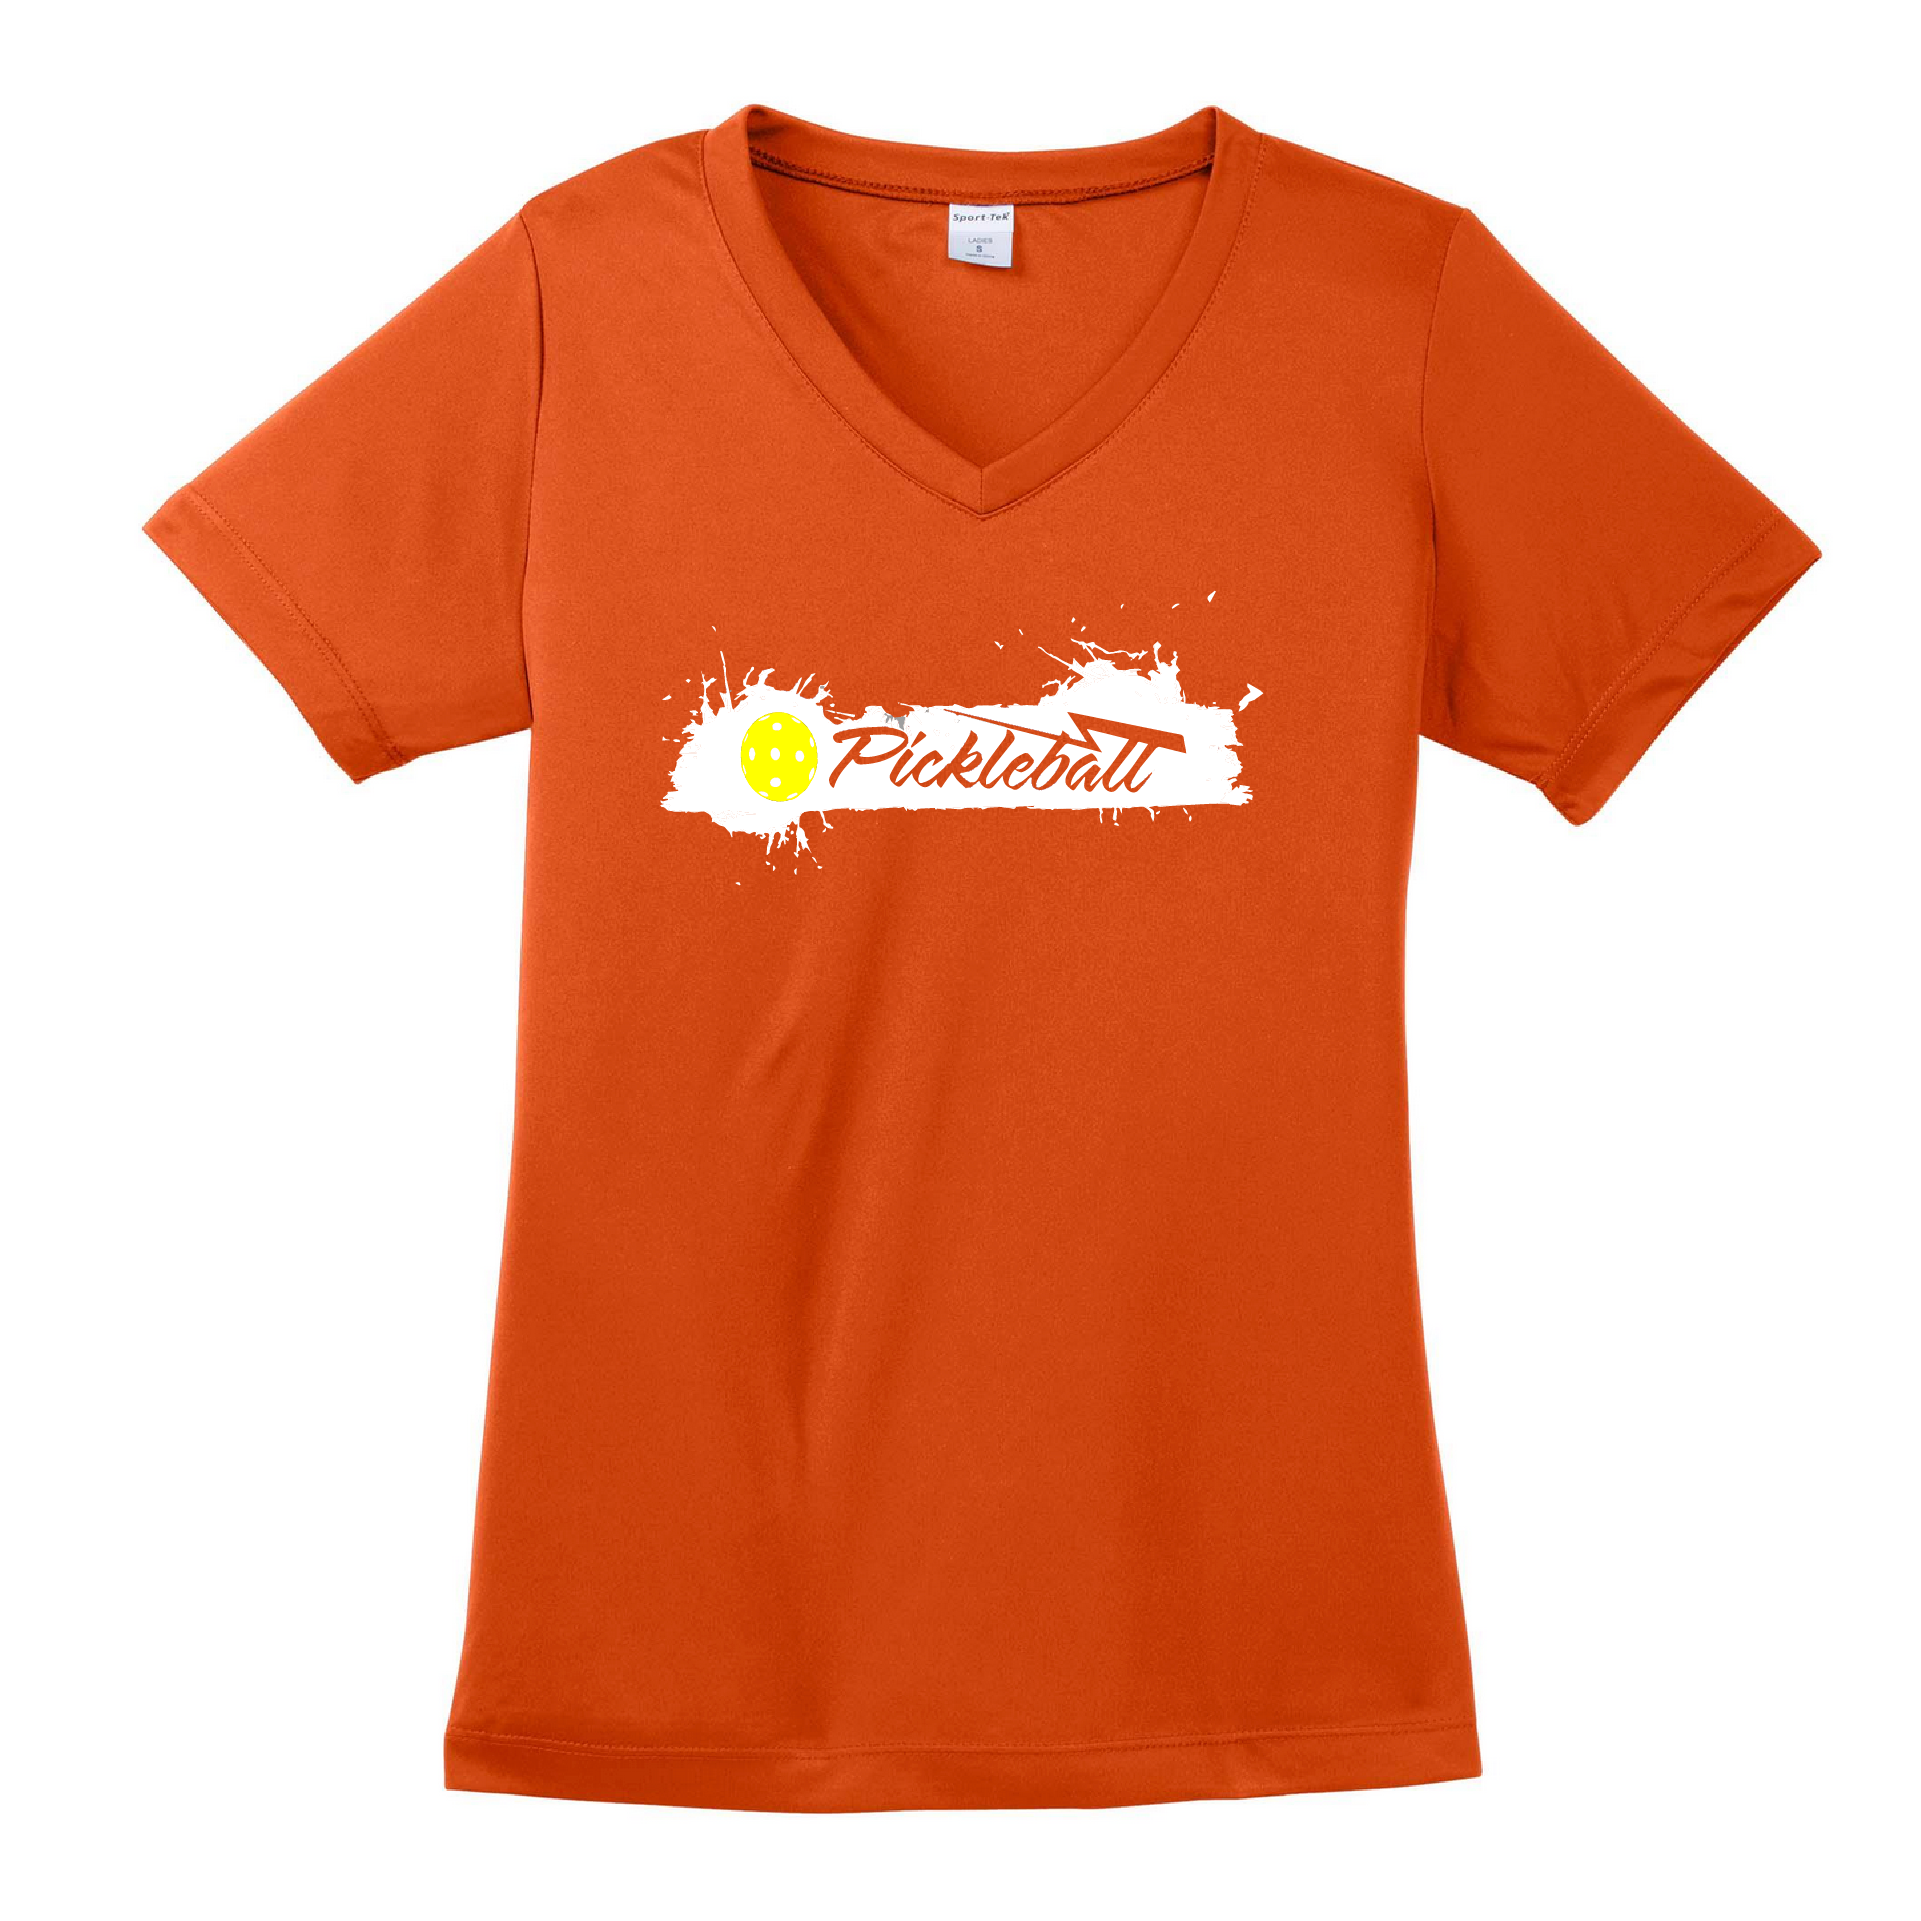 Women's Pickleball Clothing with a Purpose